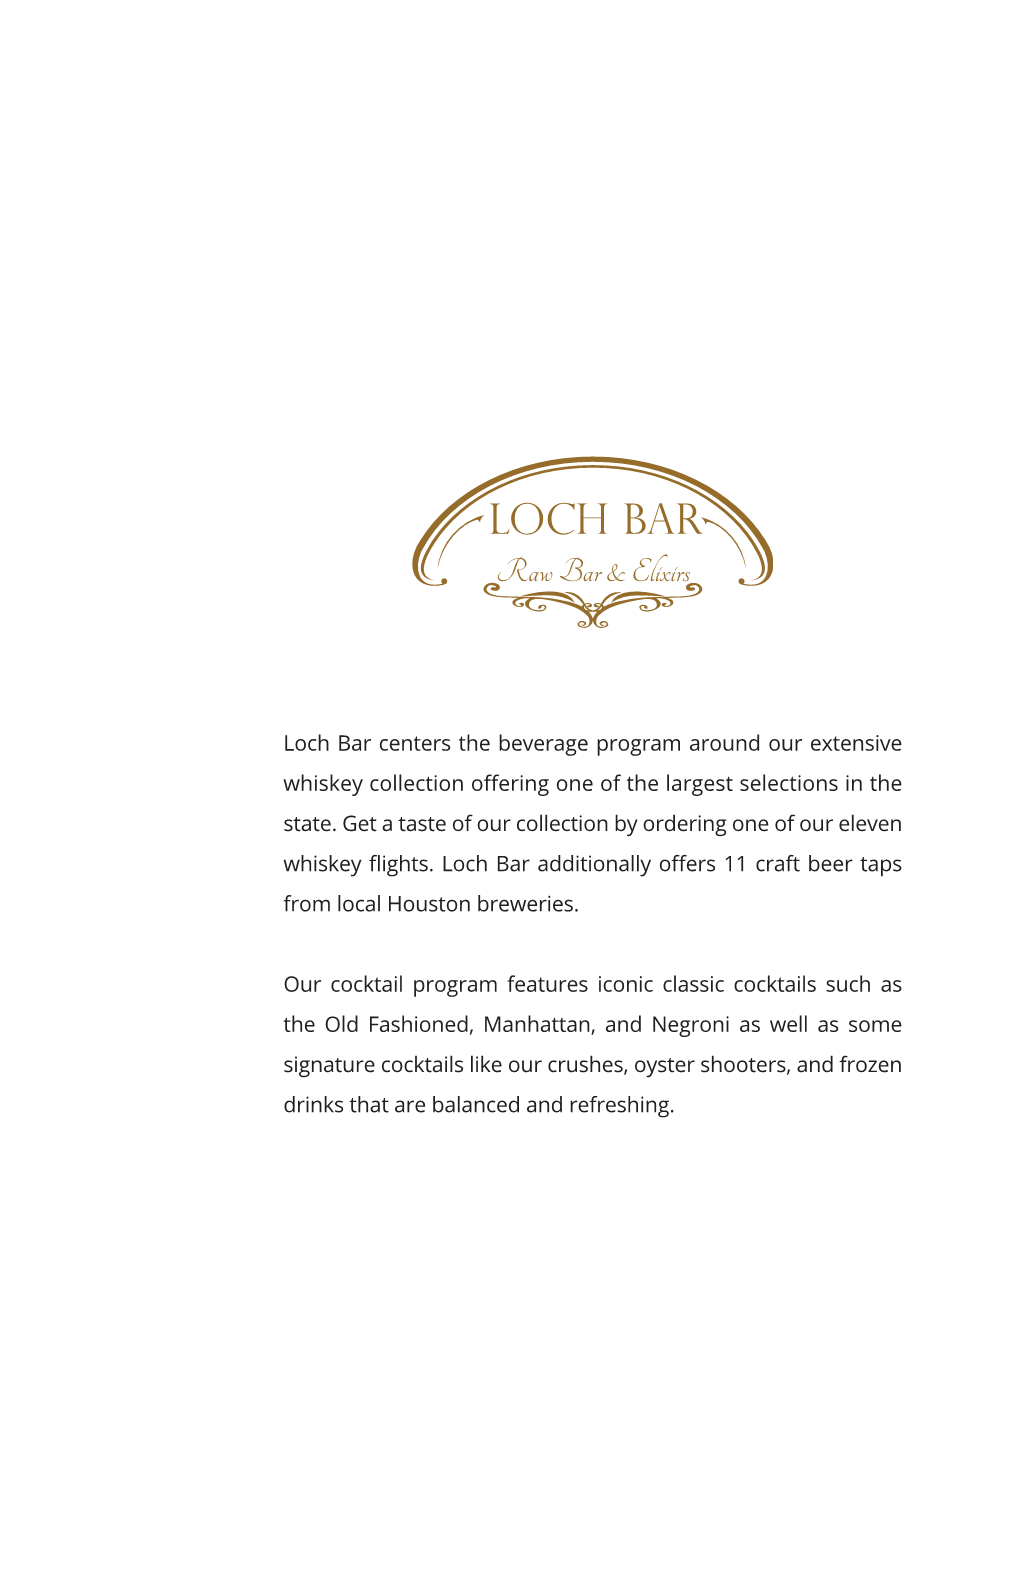 Loch Bar Centers the Beverage Program Around Our Extensive Whiskey Collection Offering One of the Largest Selections in the State